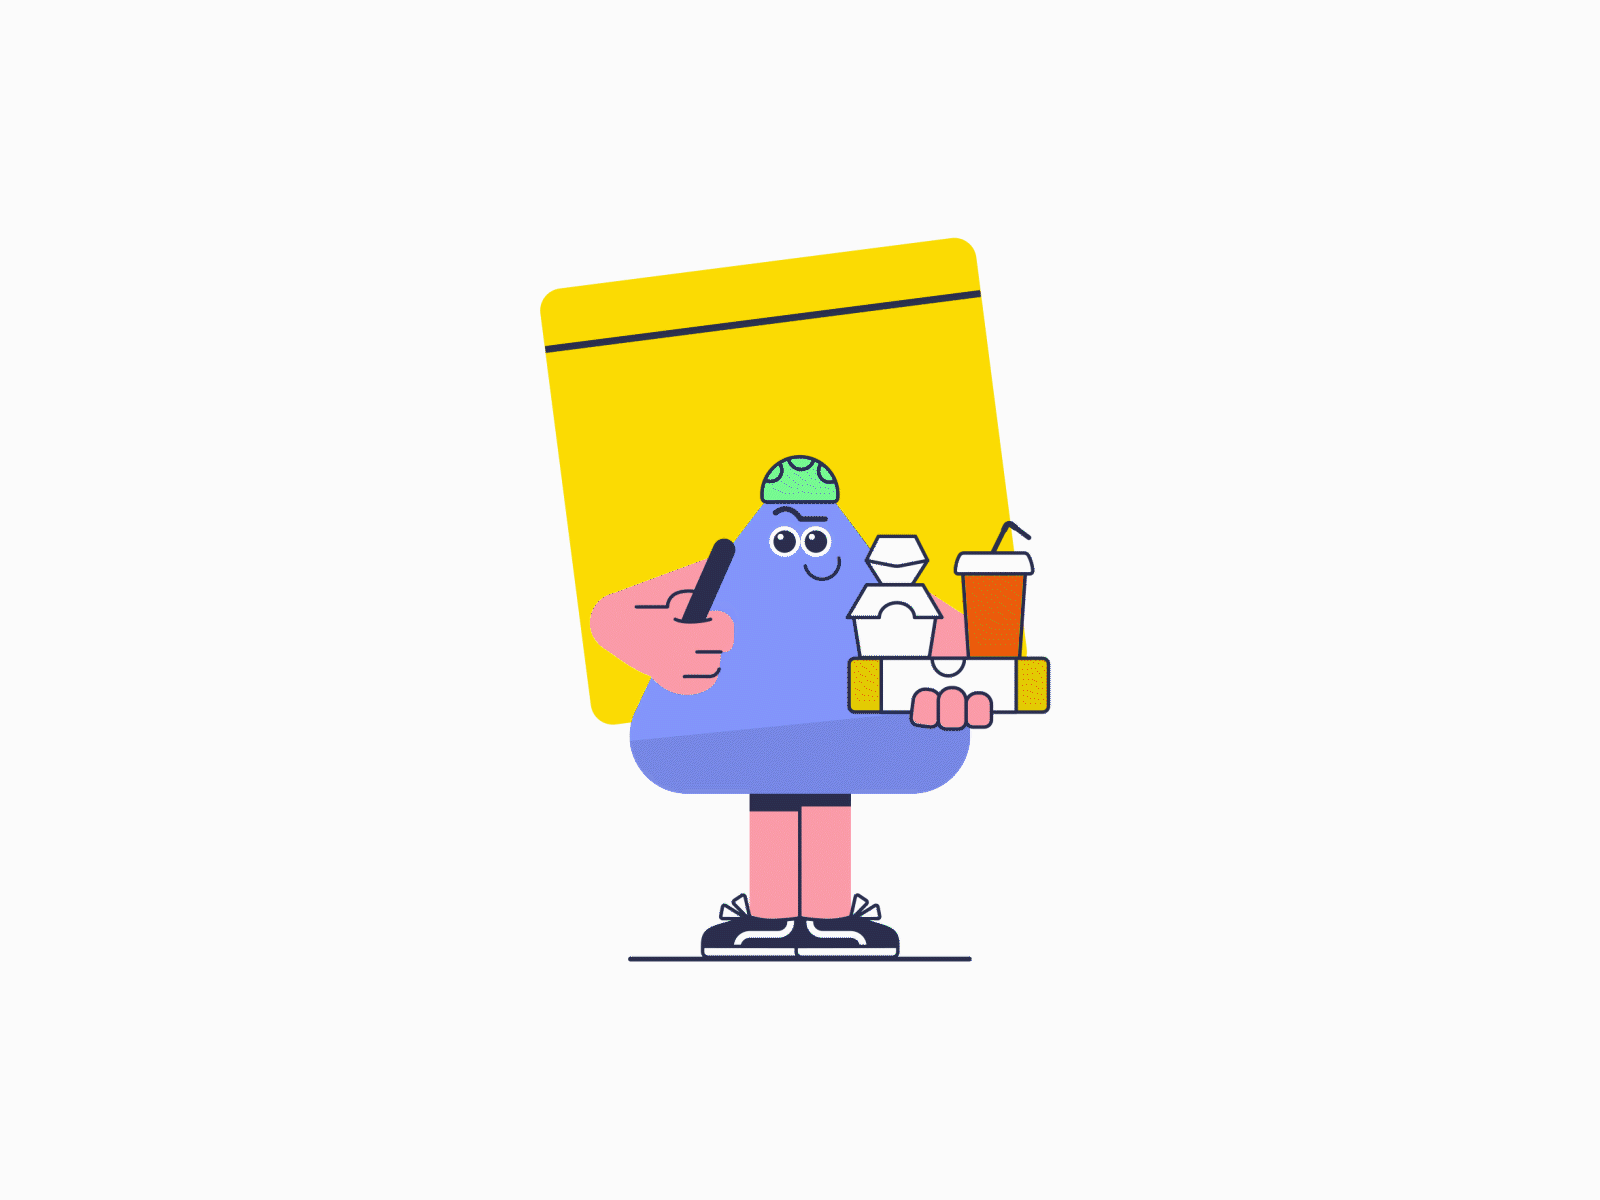 Maikel Rider has arrived aftereffects branding character characterperez delivery design design art flat illustration illustrator logo lottie lottiefiles mascot motion motion graphics ui